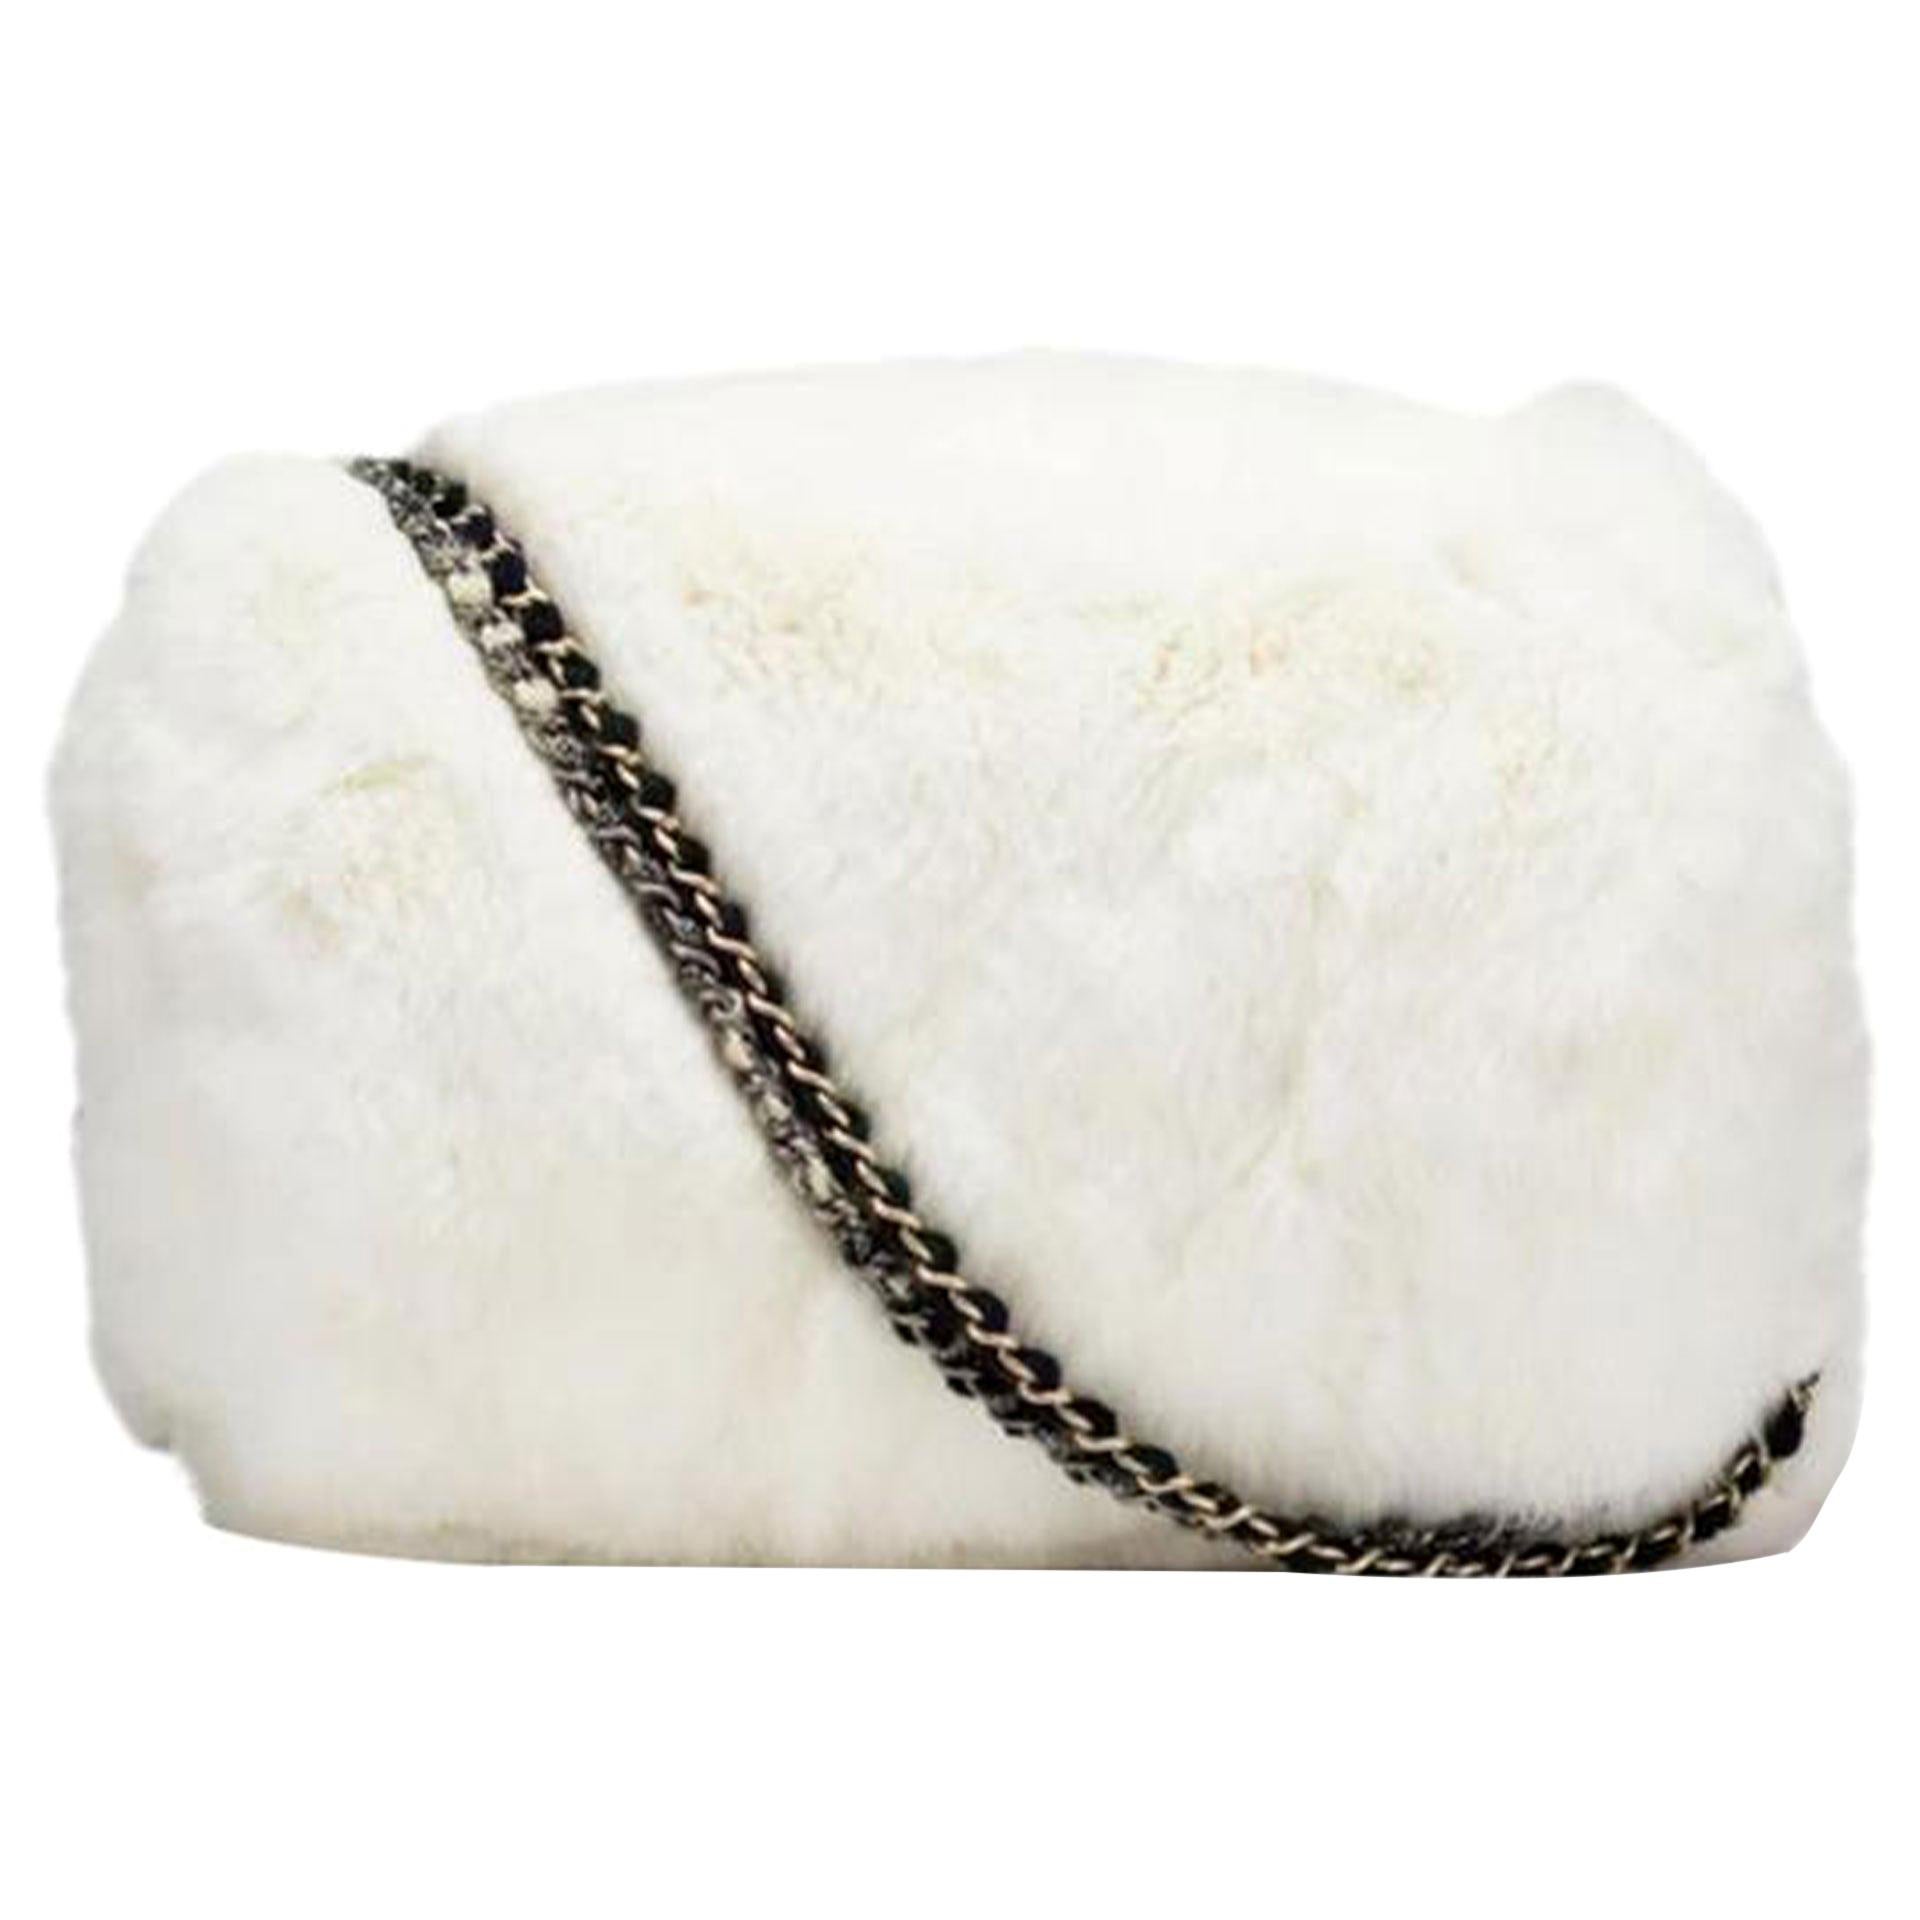 Chanel Chain Vintage Muff Black and White Grey Tweed Fur Cross Body Bag For Sale